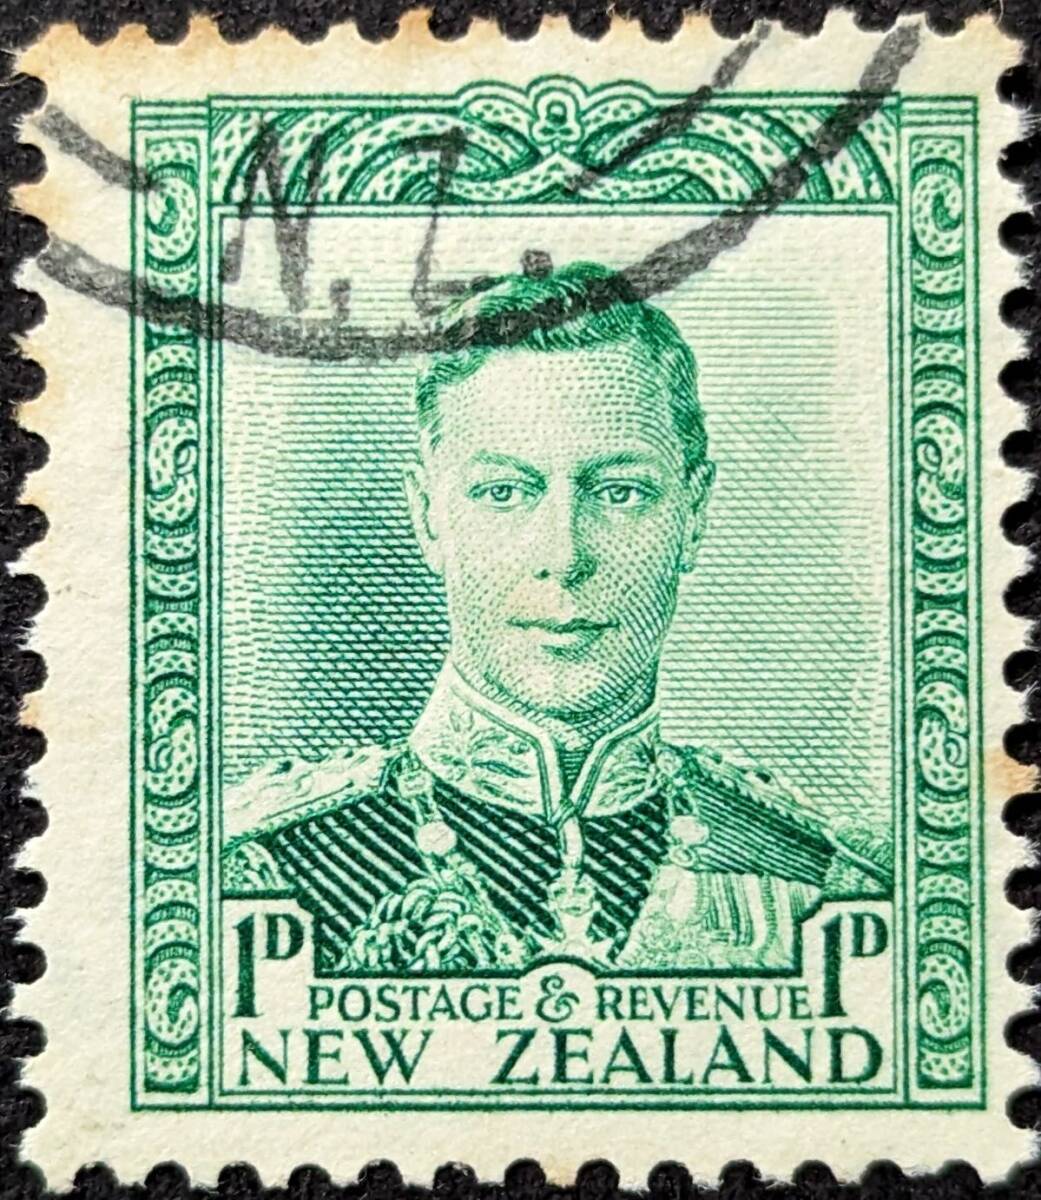 [ foreign stamp ] New Zealand 1938 year 03 month 01 day issue King * George 5.-2. seal attaching 